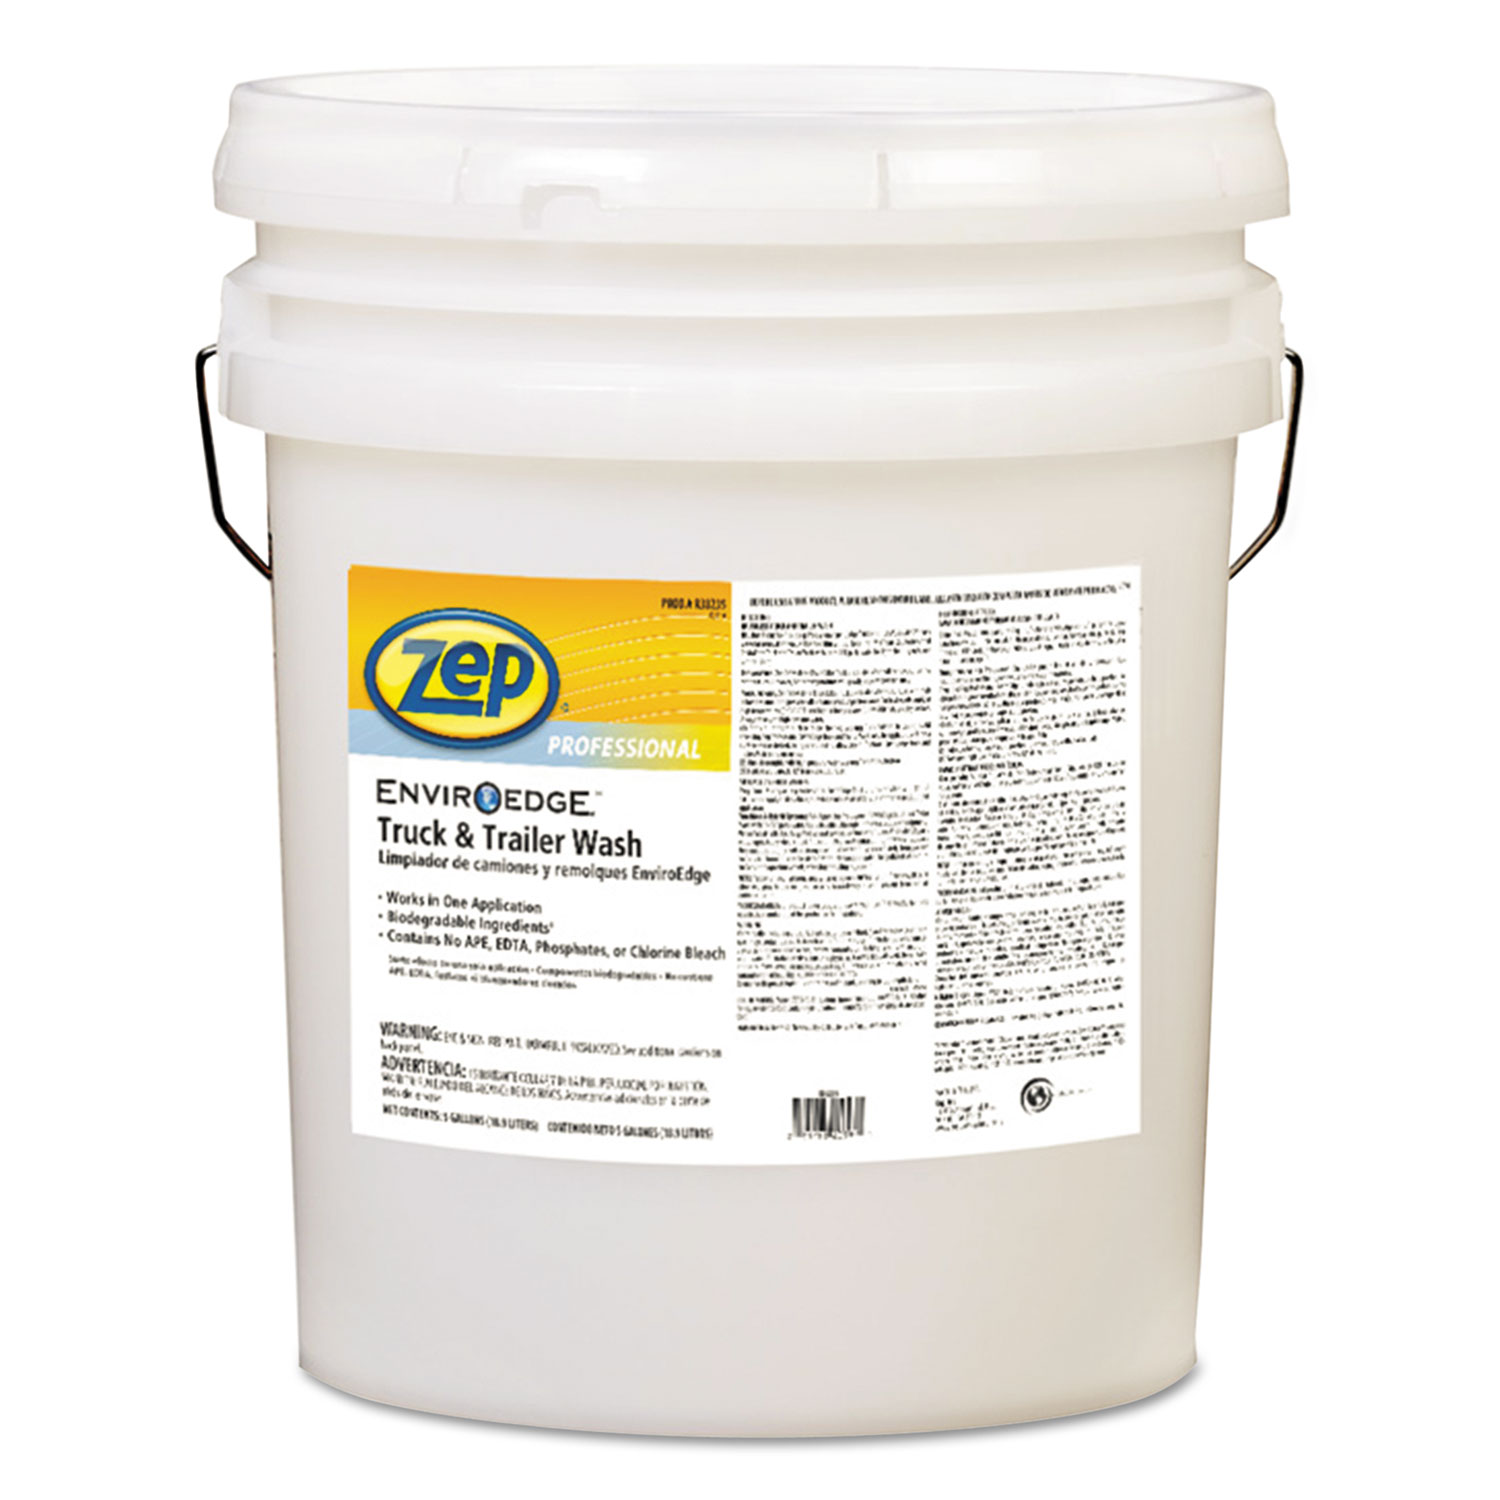  Zep Professional 1047673 EnviroEdge Truck and Trailer Wash, 5 gal Pail (ZPE1047673) 